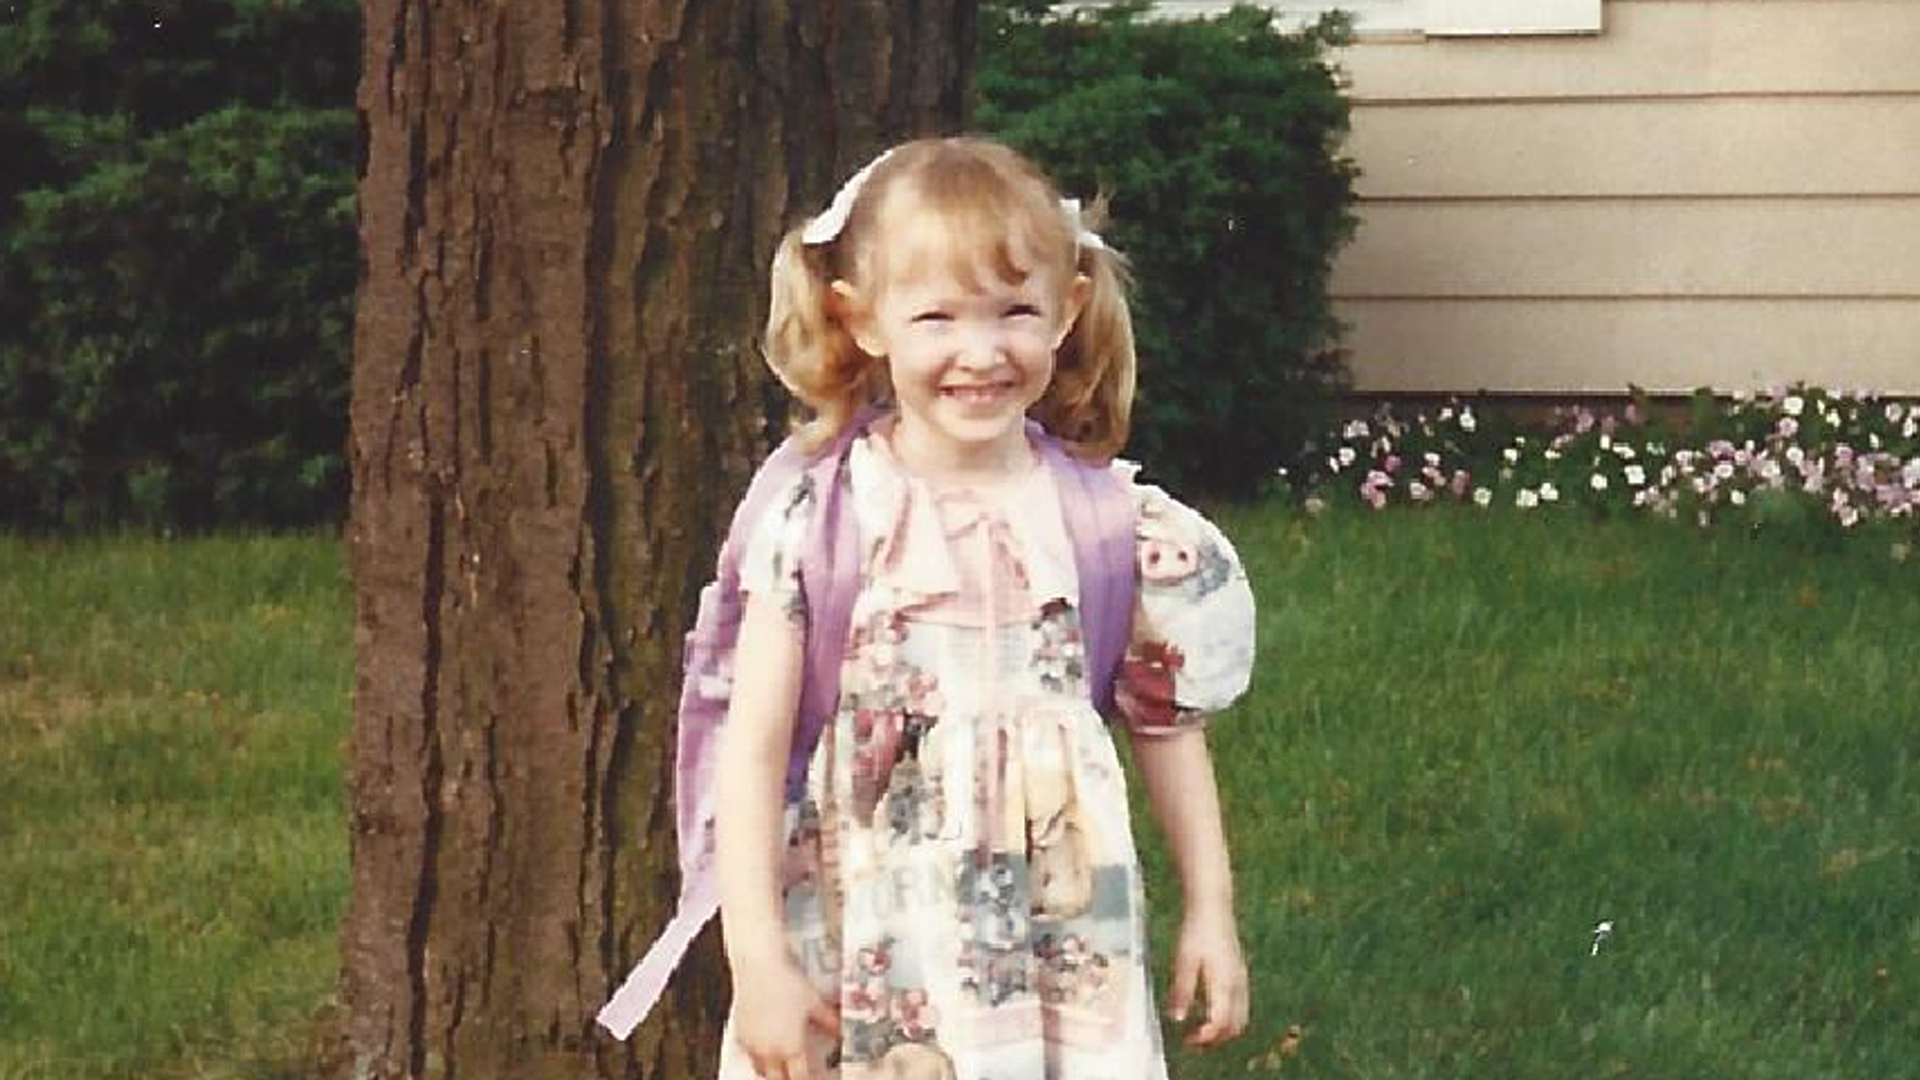 A photo of a five year old girl in a dress outside.